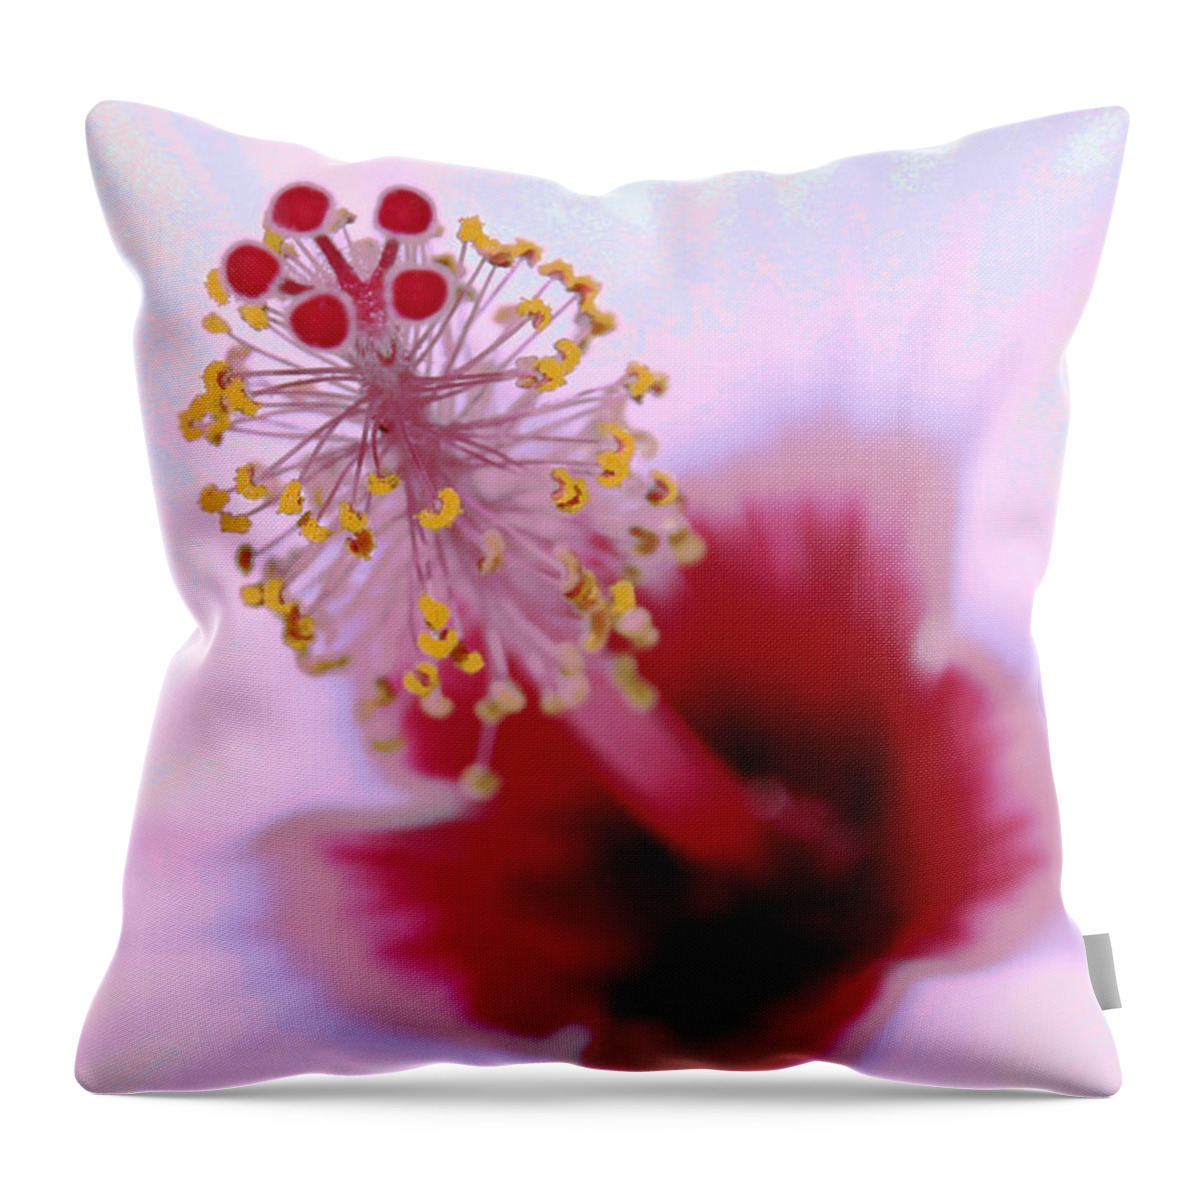 Altered Throw Pillow featuring the photograph Altered Flower 1 by Andrew Hewett